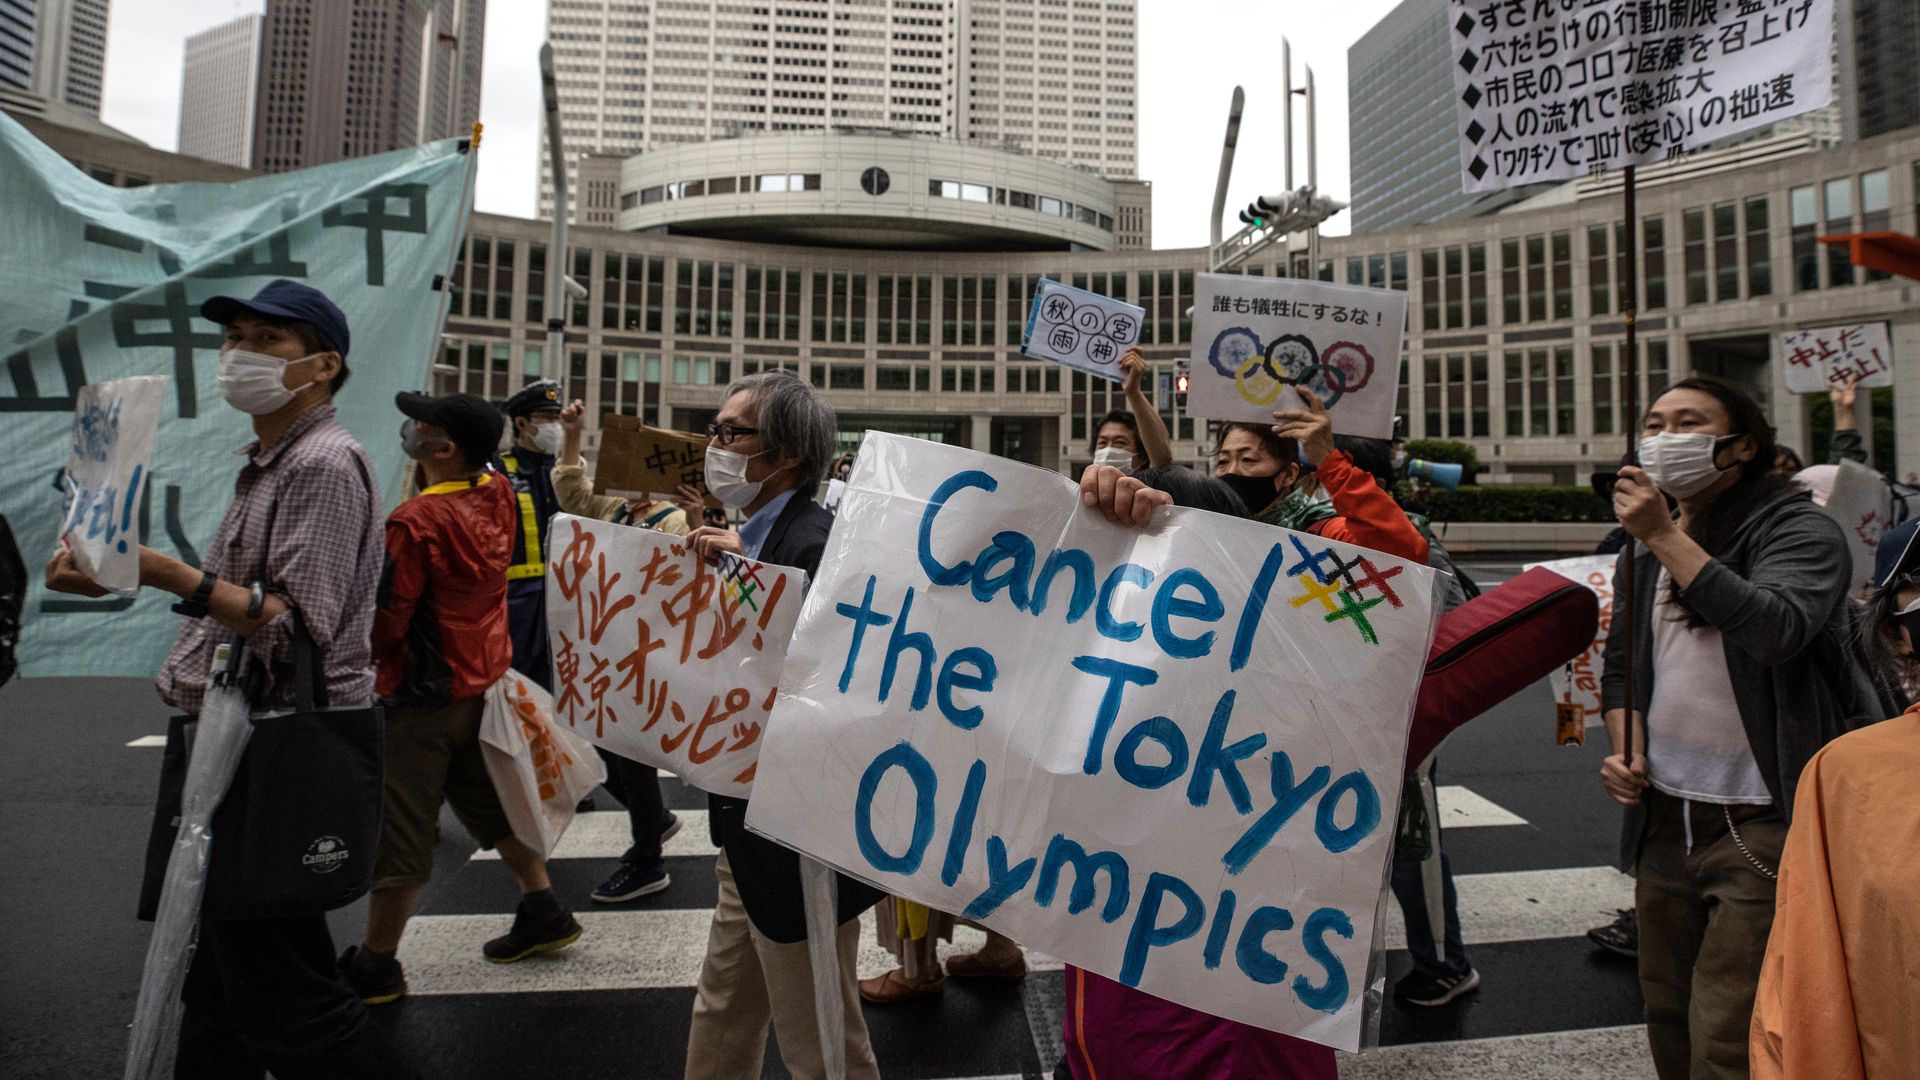 Picture of group of people protesting against the Olympics in Tokyo, with one sign that reads "Cancel the Tokyo Olympics"